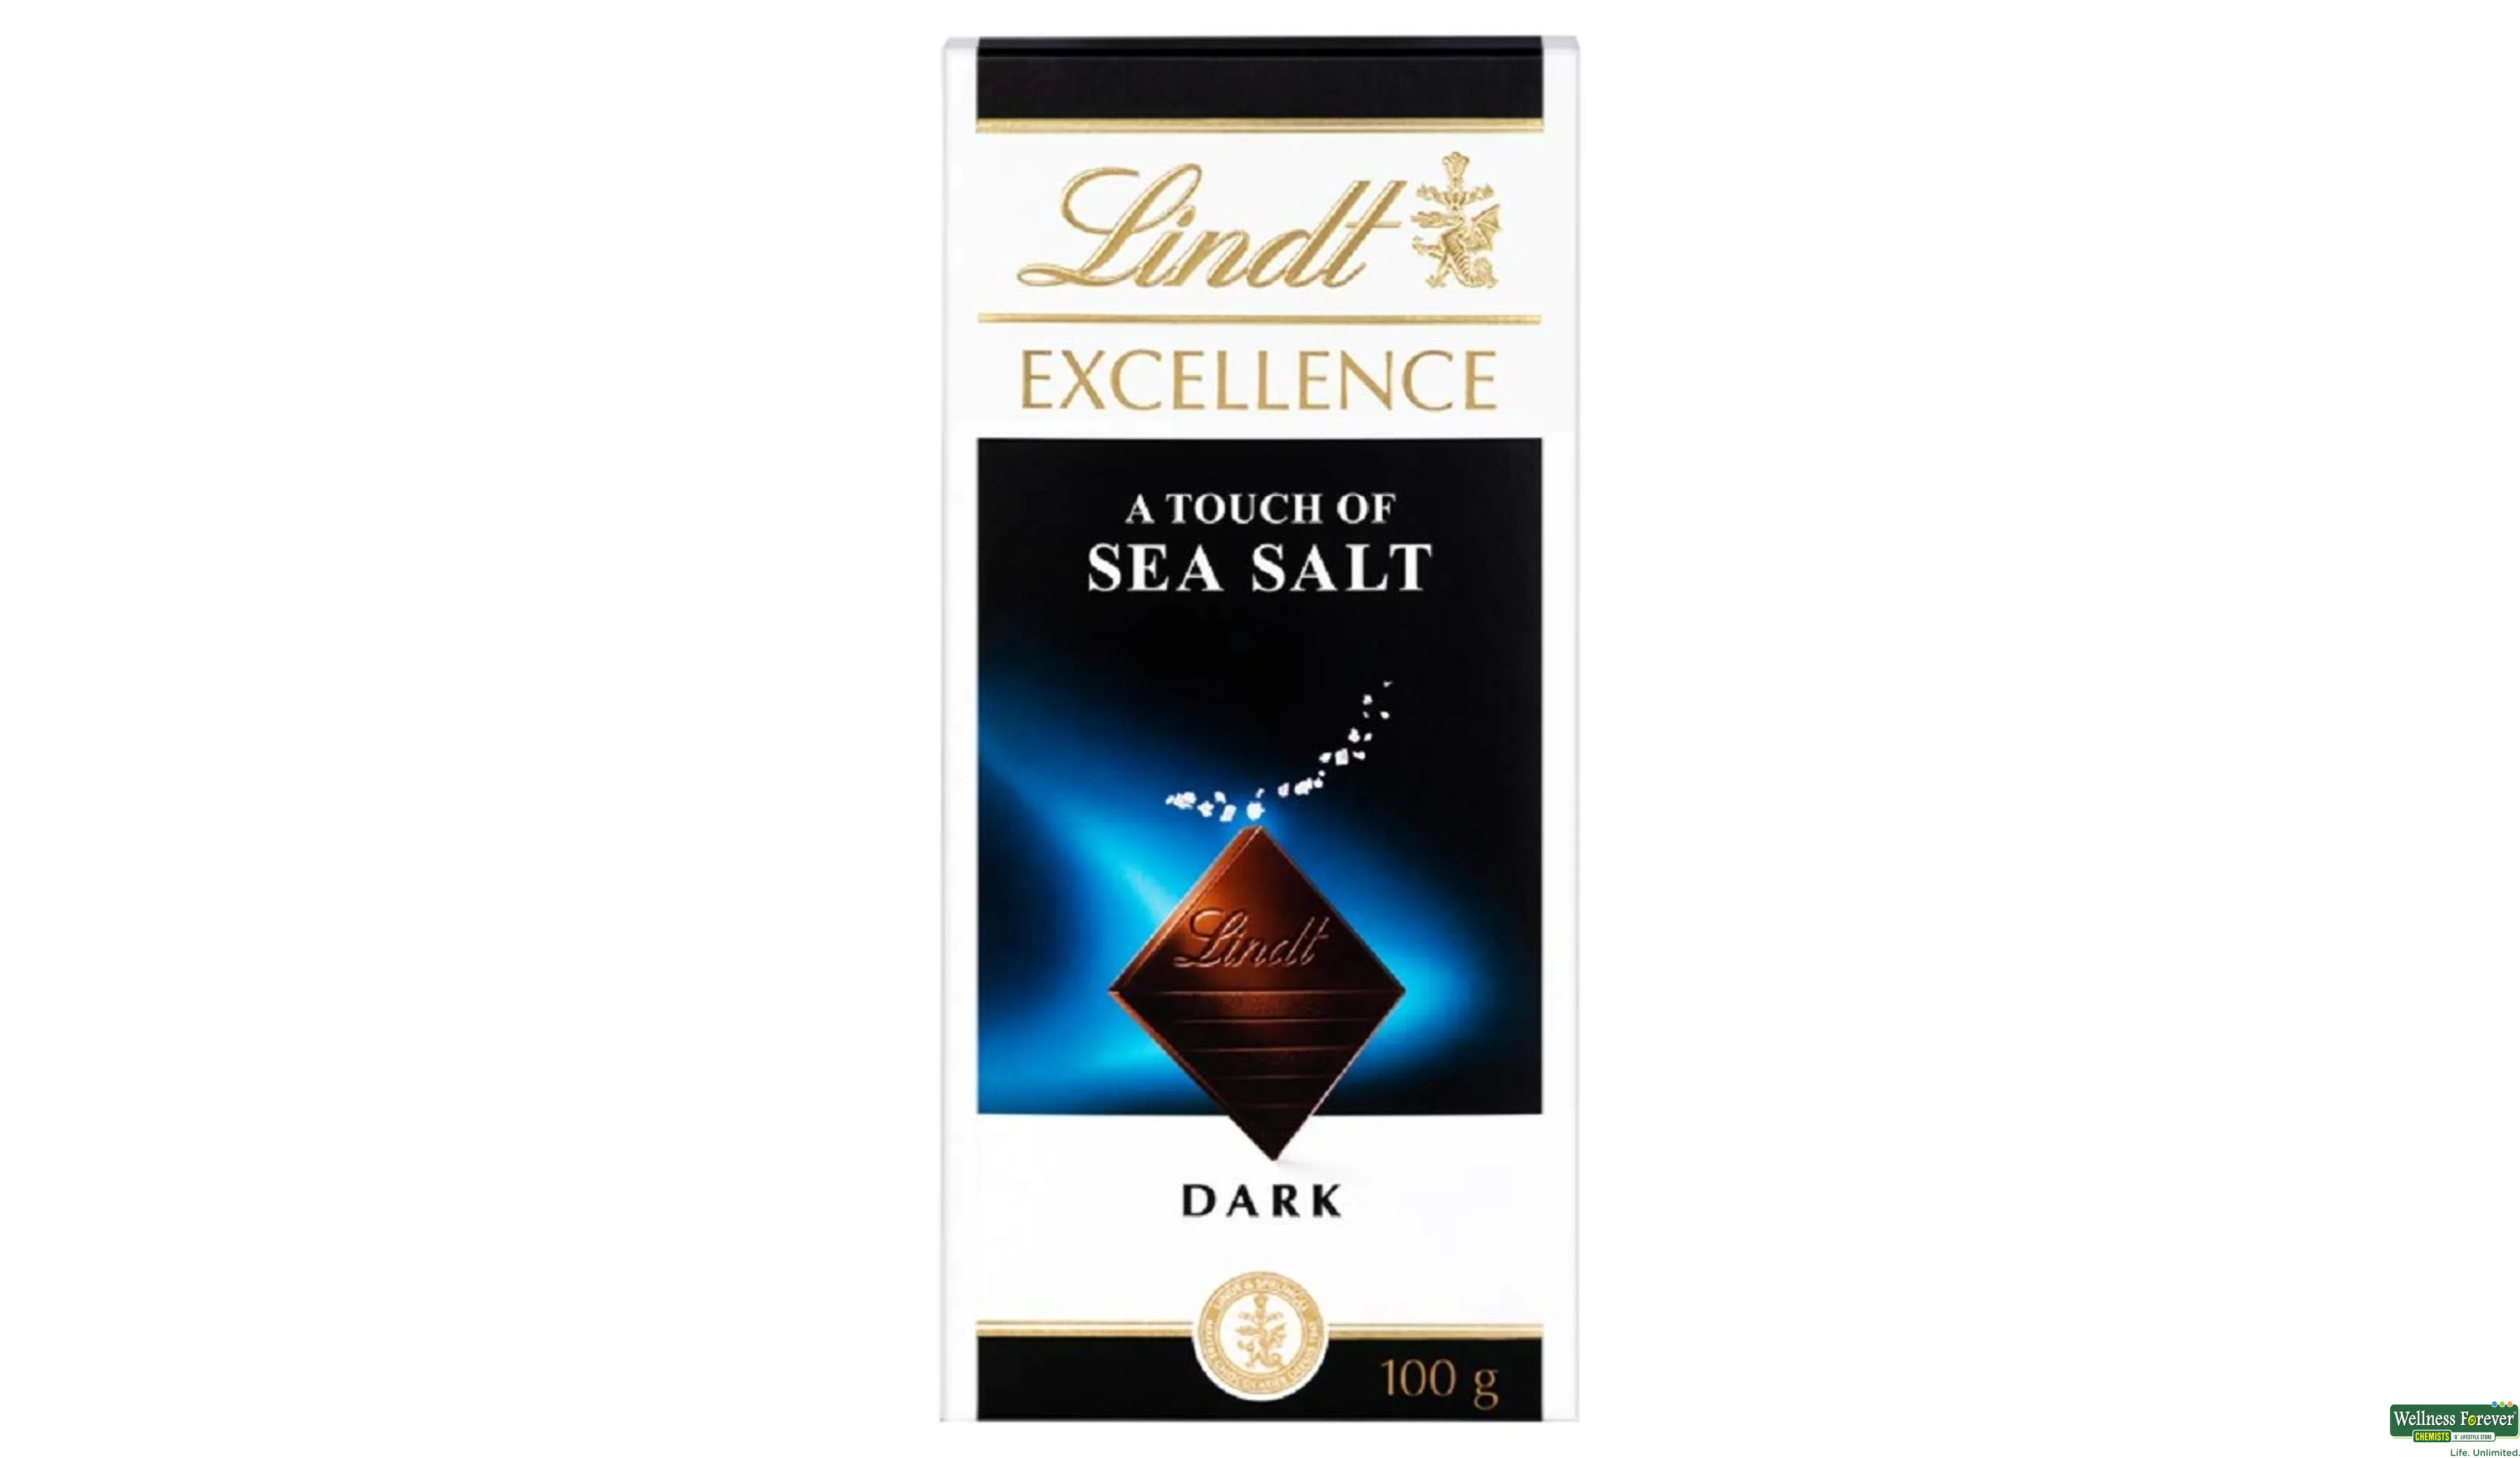 LINDT EXCELLENCE CHOCOLAT NOIR 85% CACAO 100 G